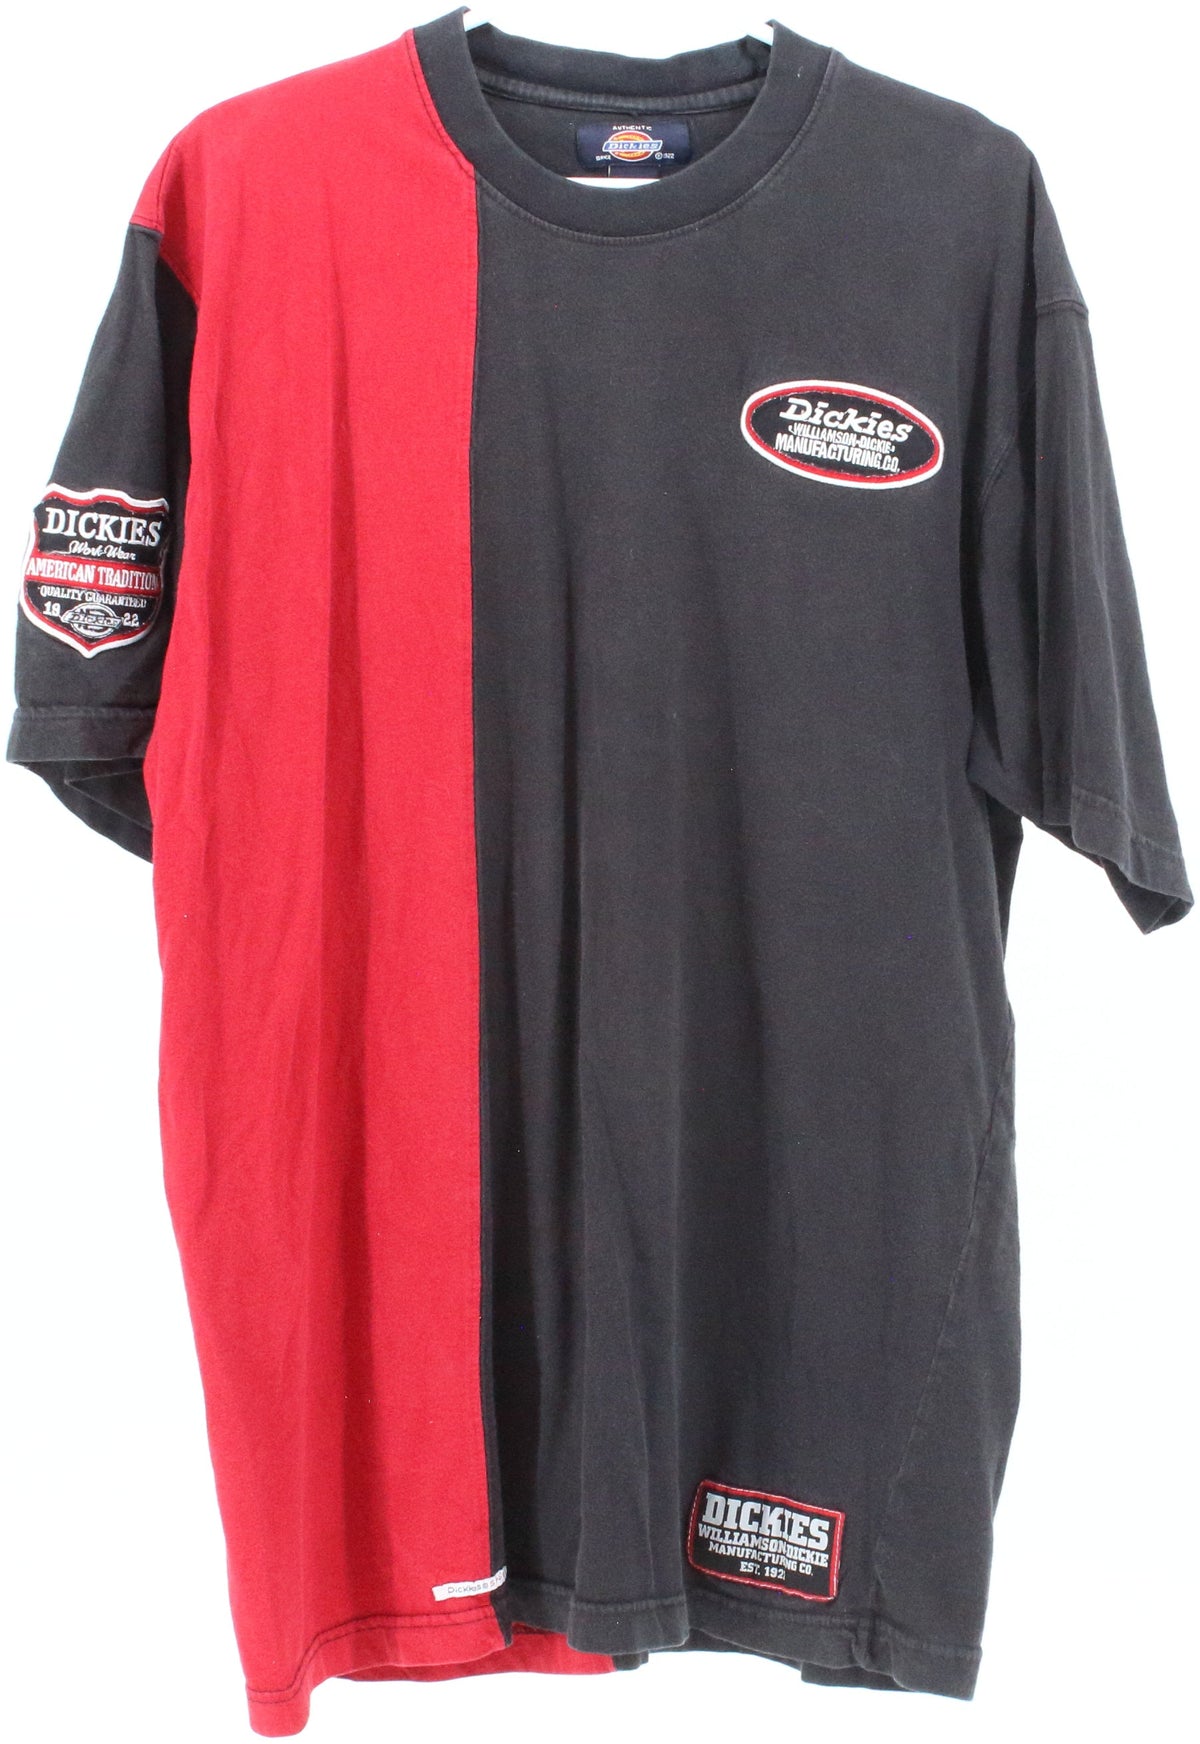 Dickies Work Wear American Tradition Black and Red T-Shirt